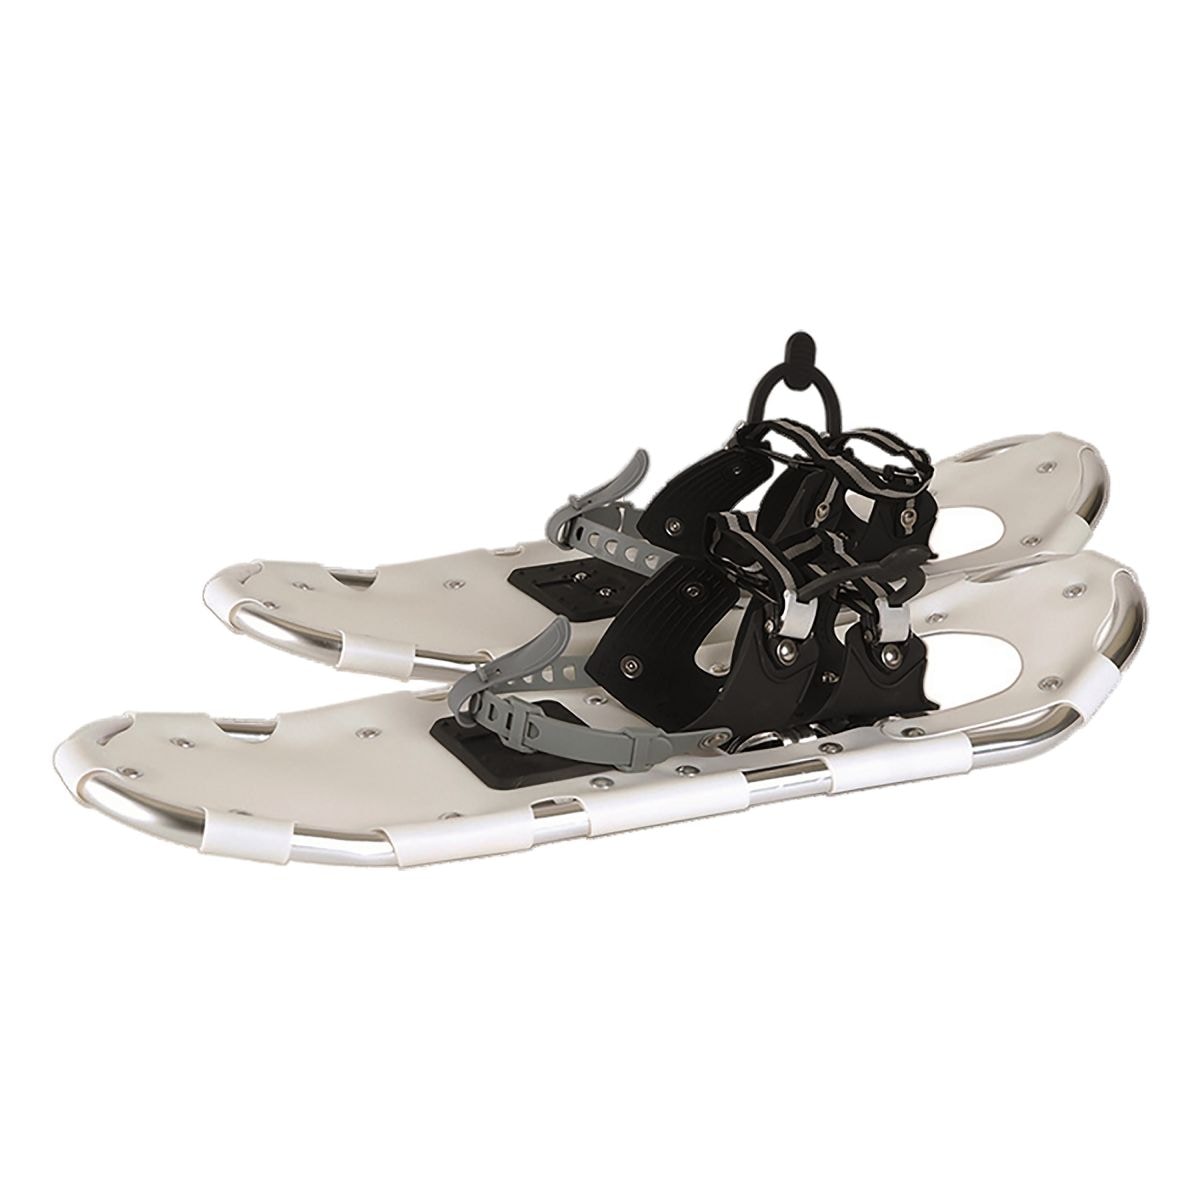 Purchase the Snow Shoes with Aluminum Frame white by ASMC